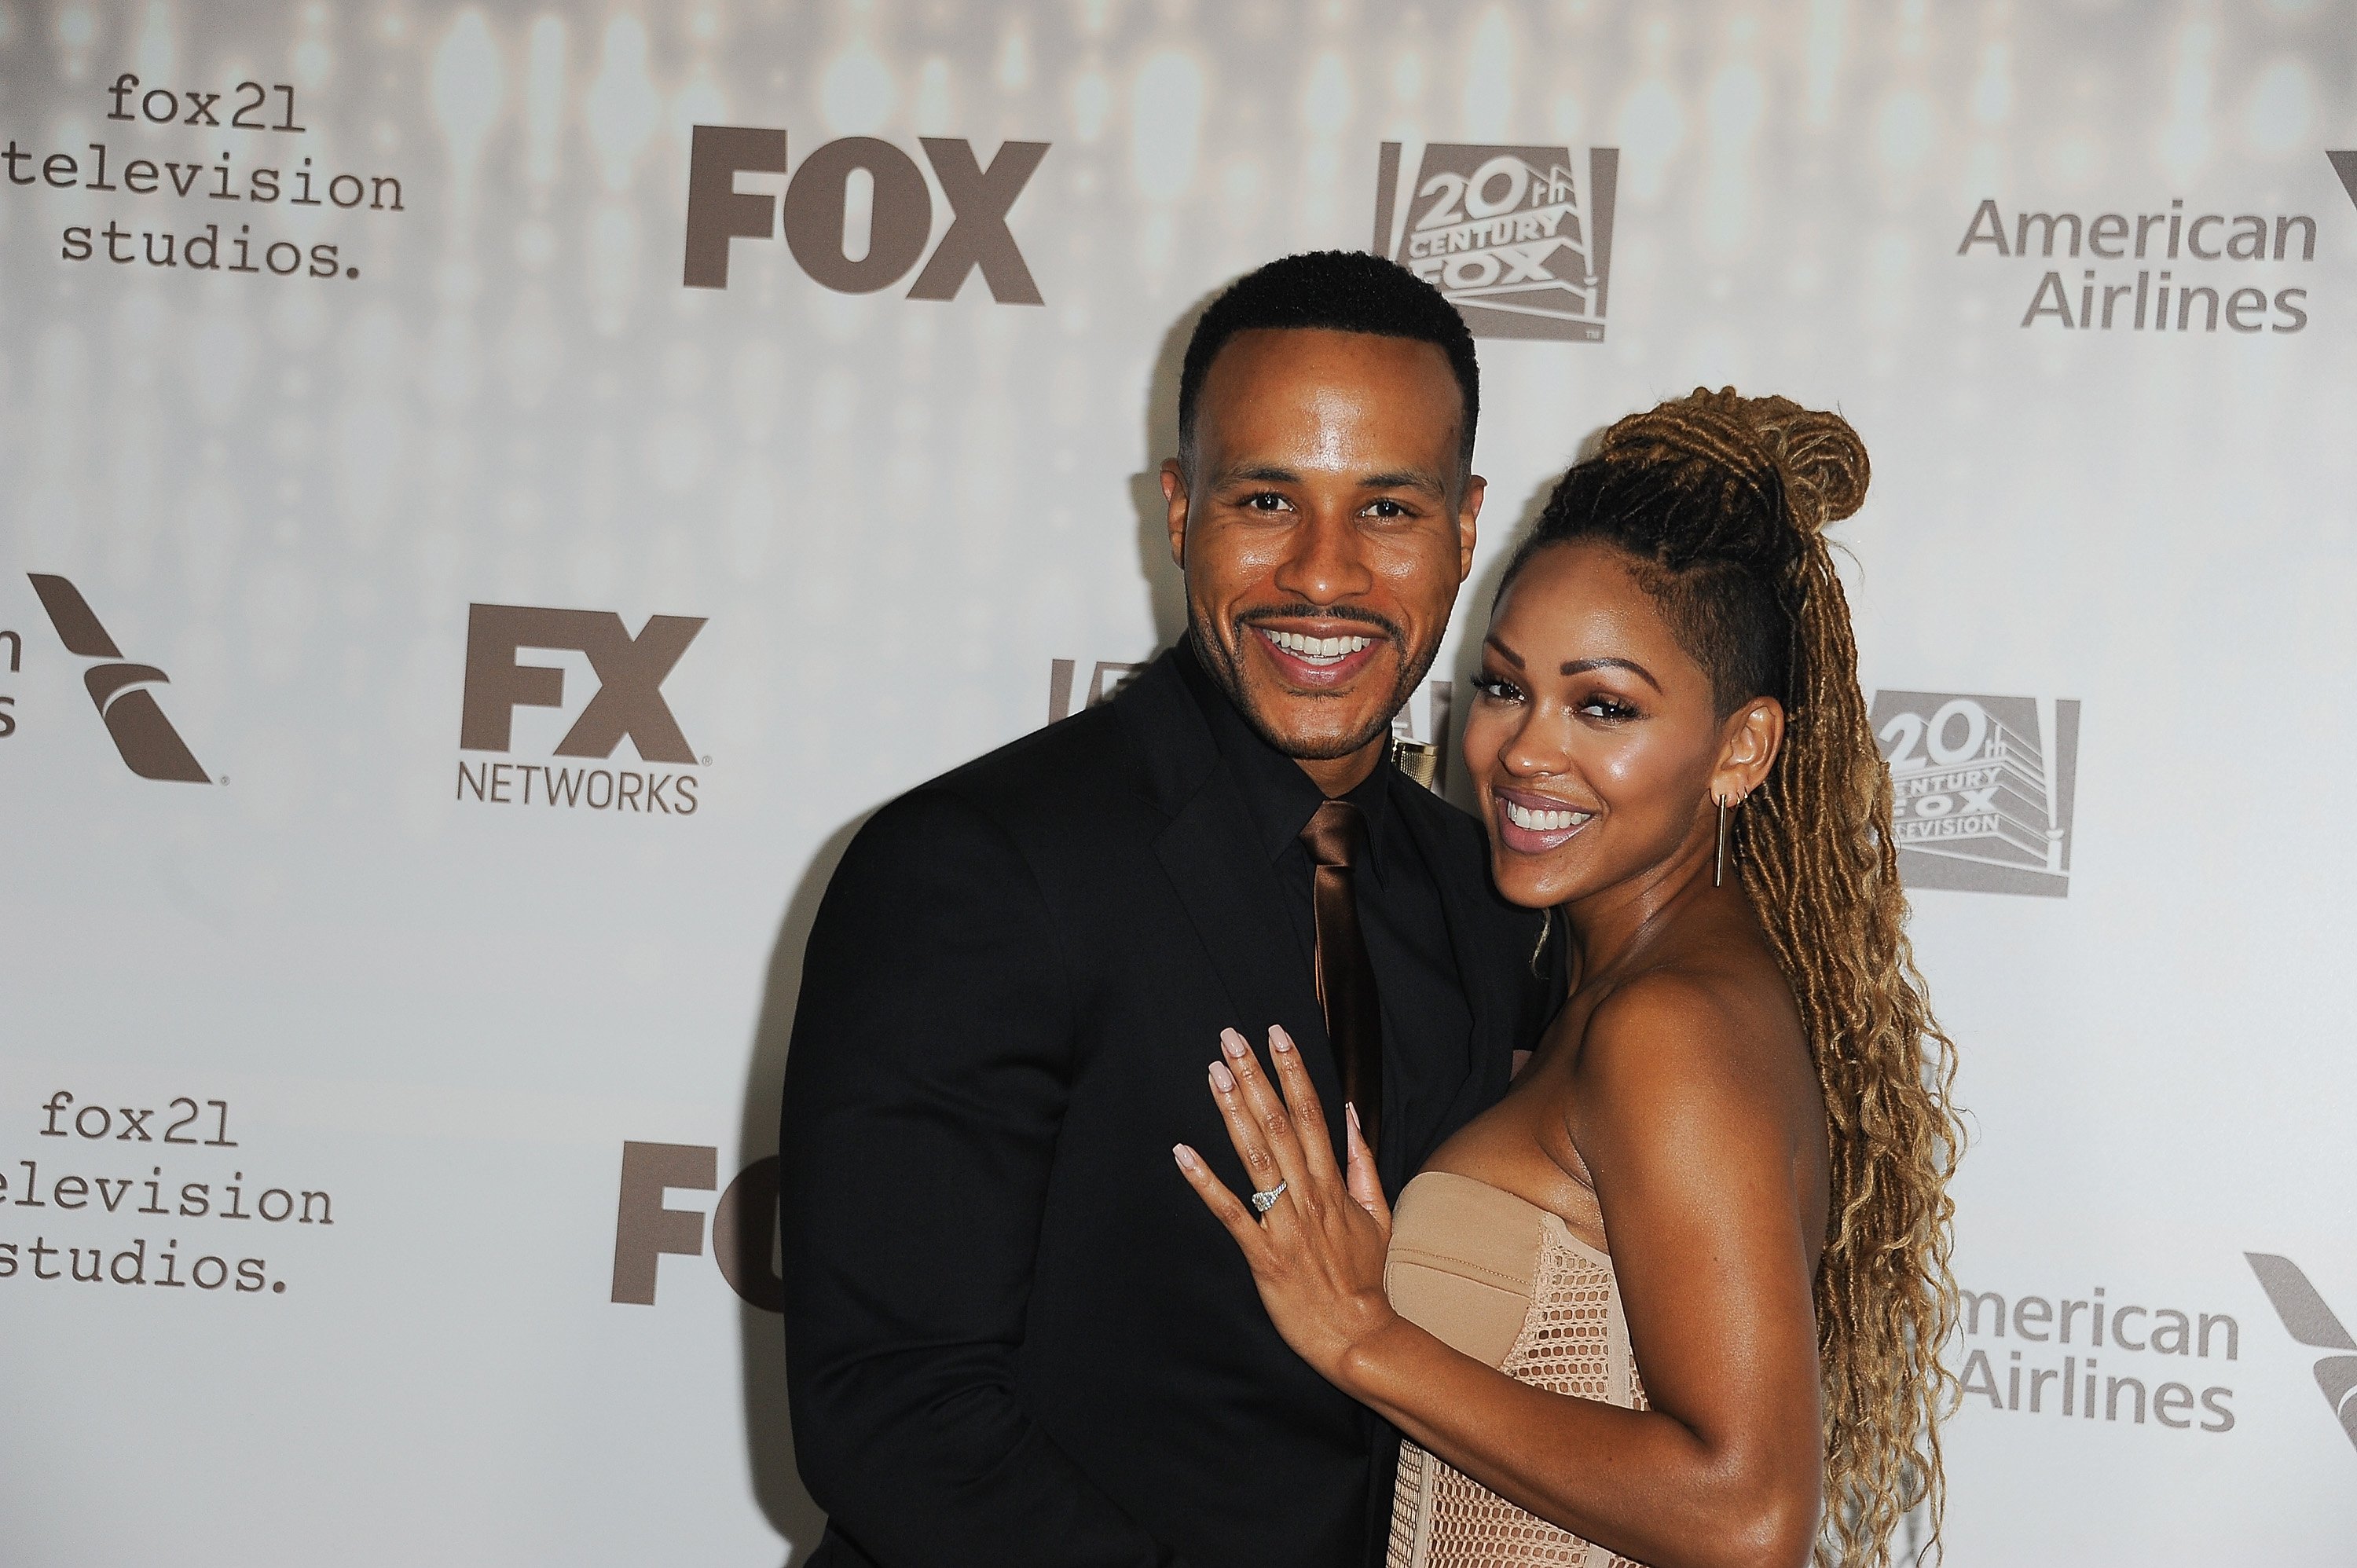 DeVon Franklin and Meagan Good at the 2017 Golden Globe Awards after-party on January 8, 2017 | Photo: Getty Images